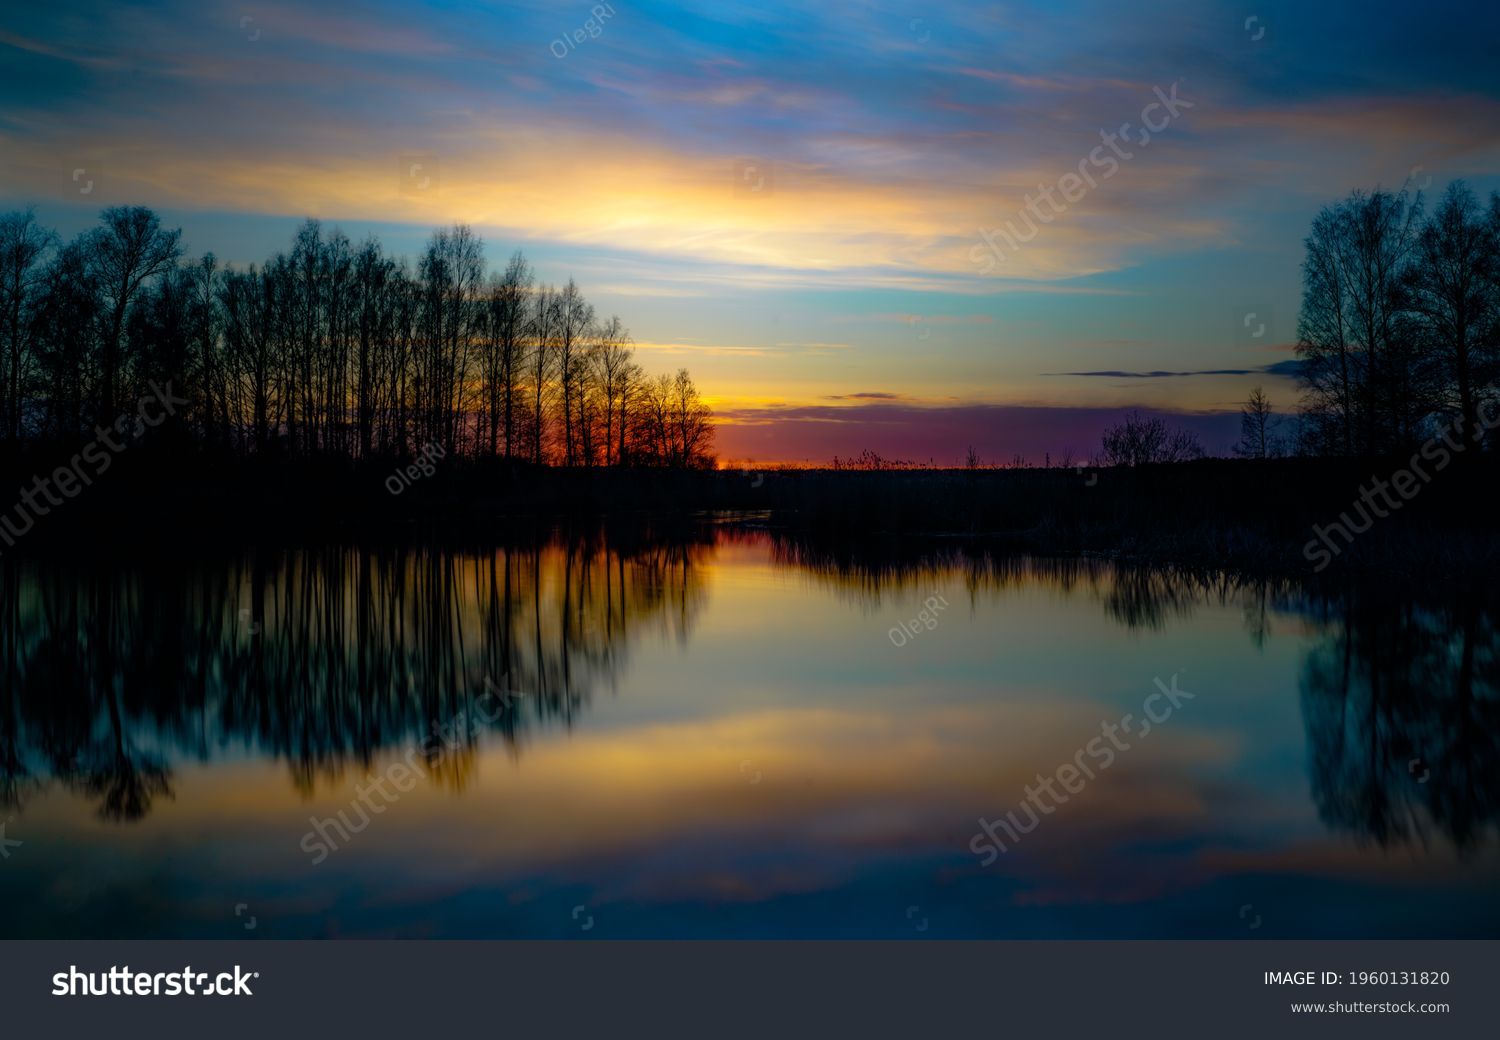 sunset at coast of the lake. Nature landscape. Nature in northern Europe. reflection, blue sky and yellow sunlight. landscape during sunset. Stock Photo